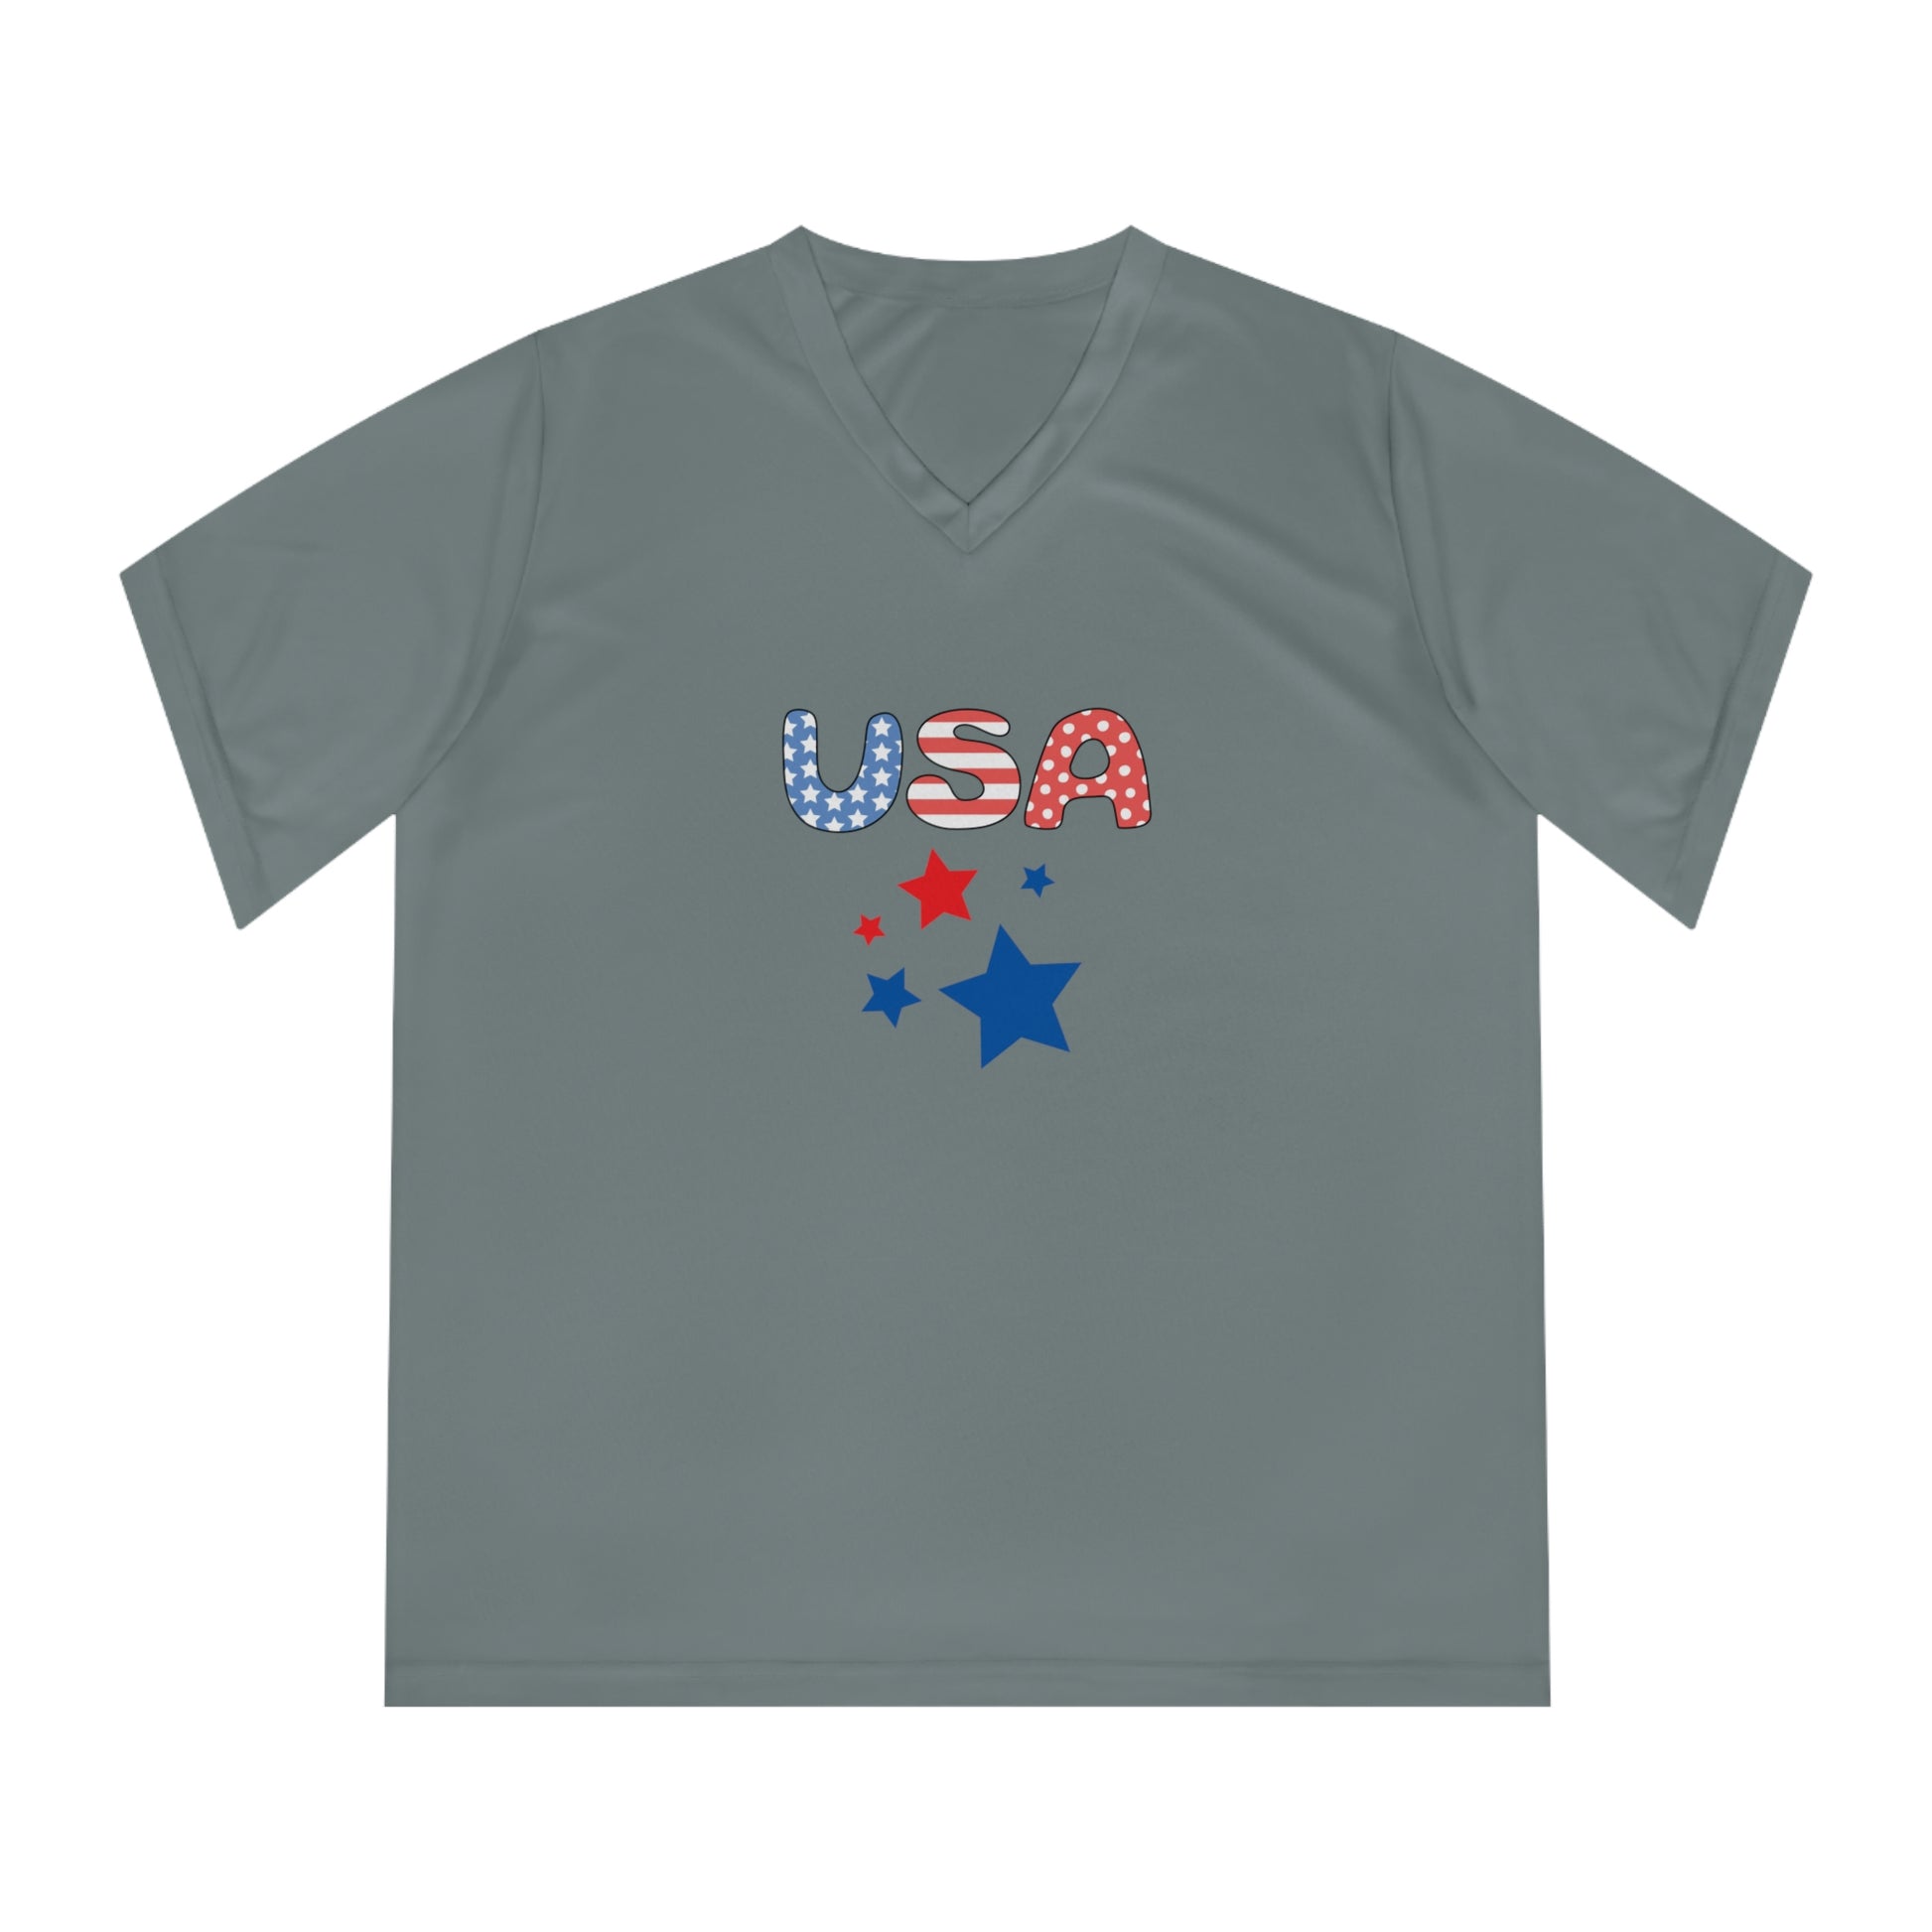 Flat front view of the Sport Graphic grey t-shirt